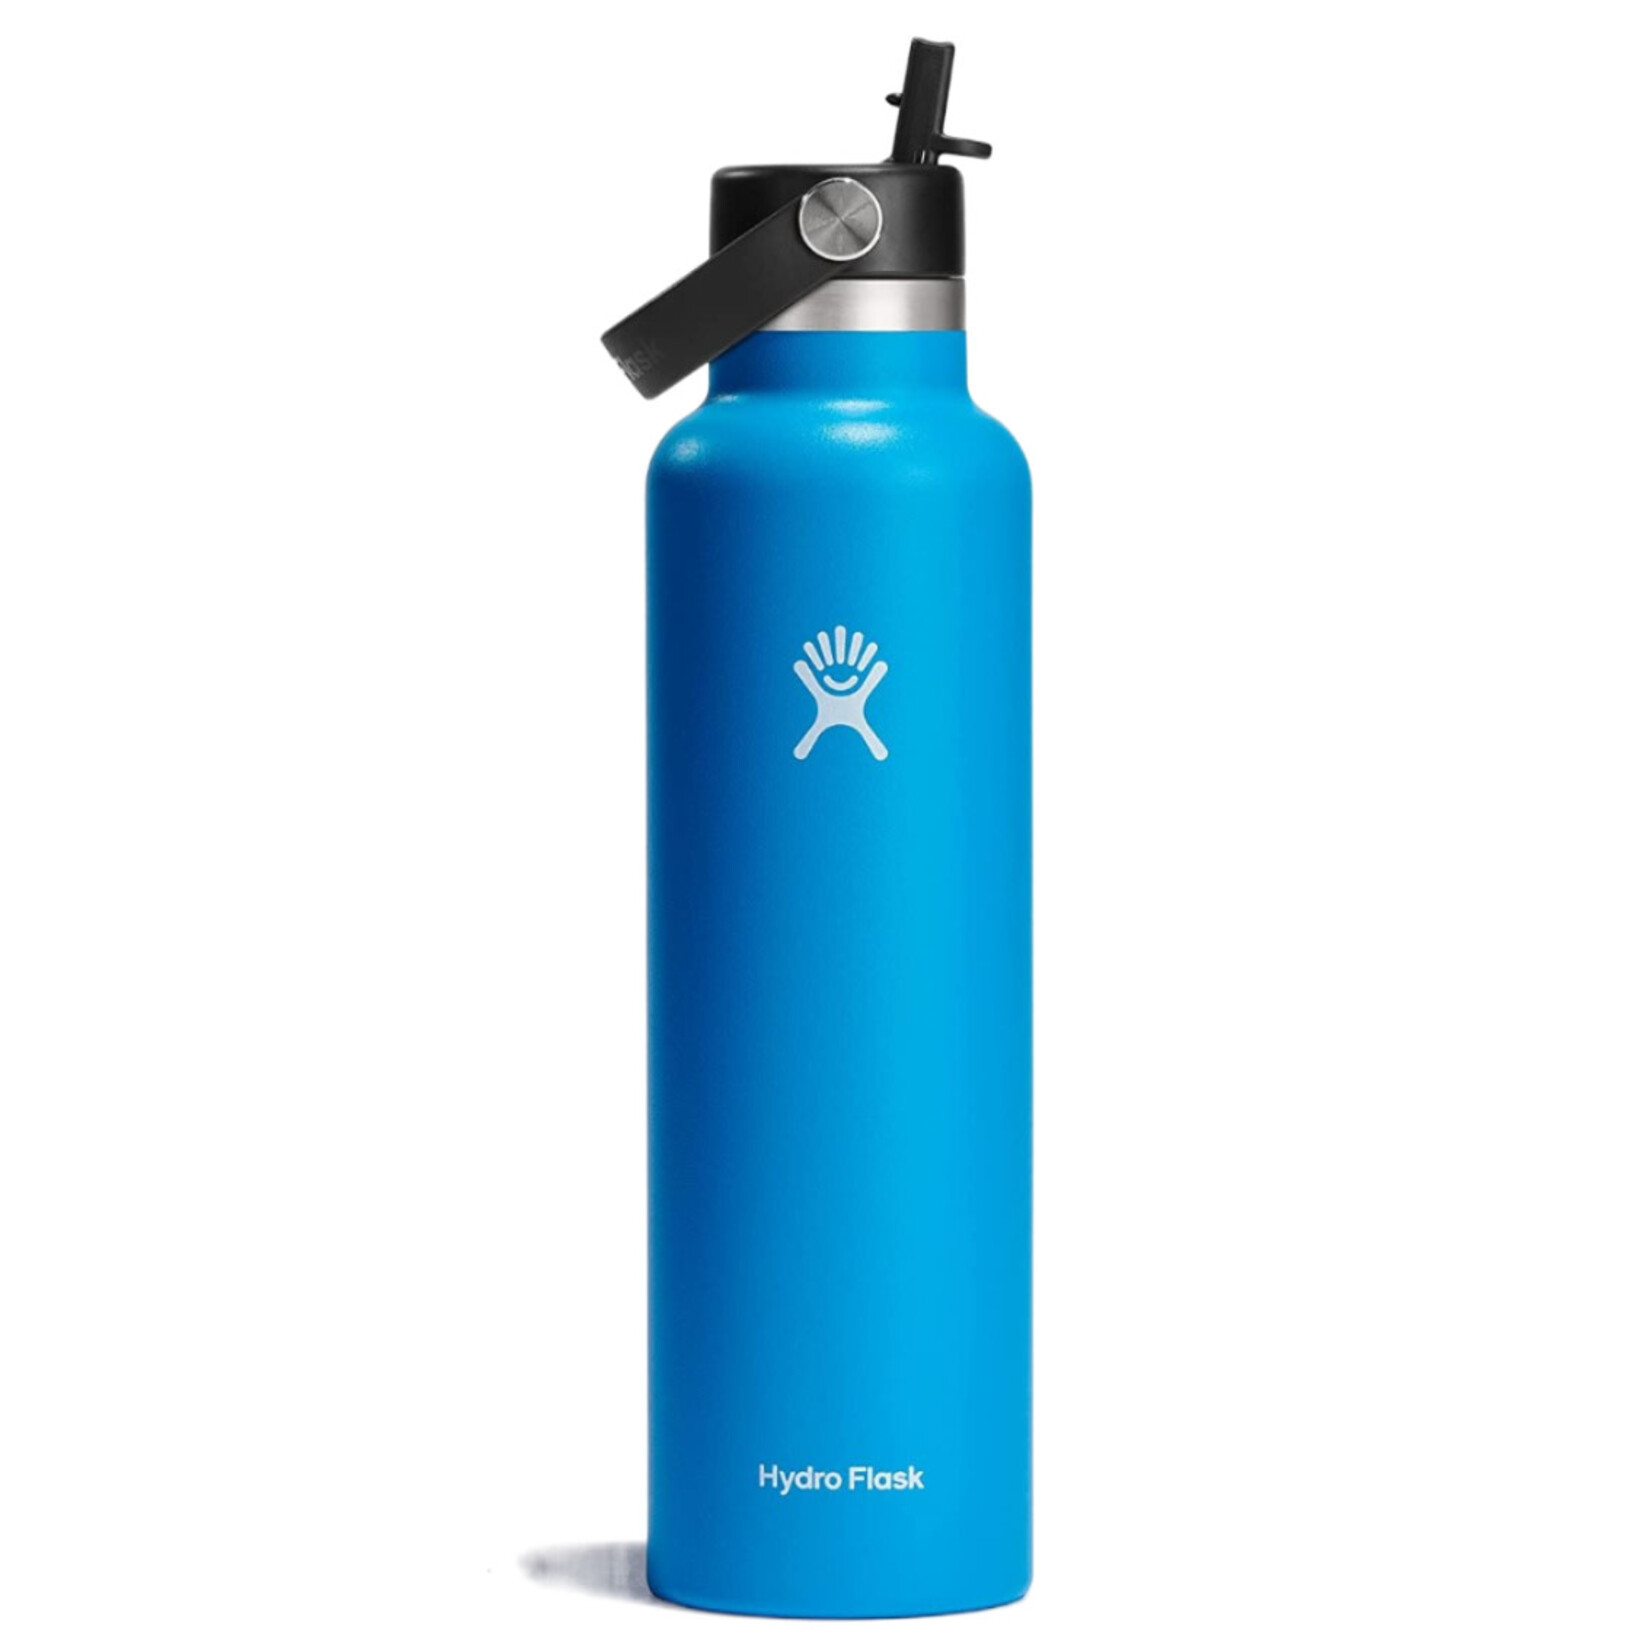 Straw Lid for Hydro Flask Standard Mouth Water Bottle. New and